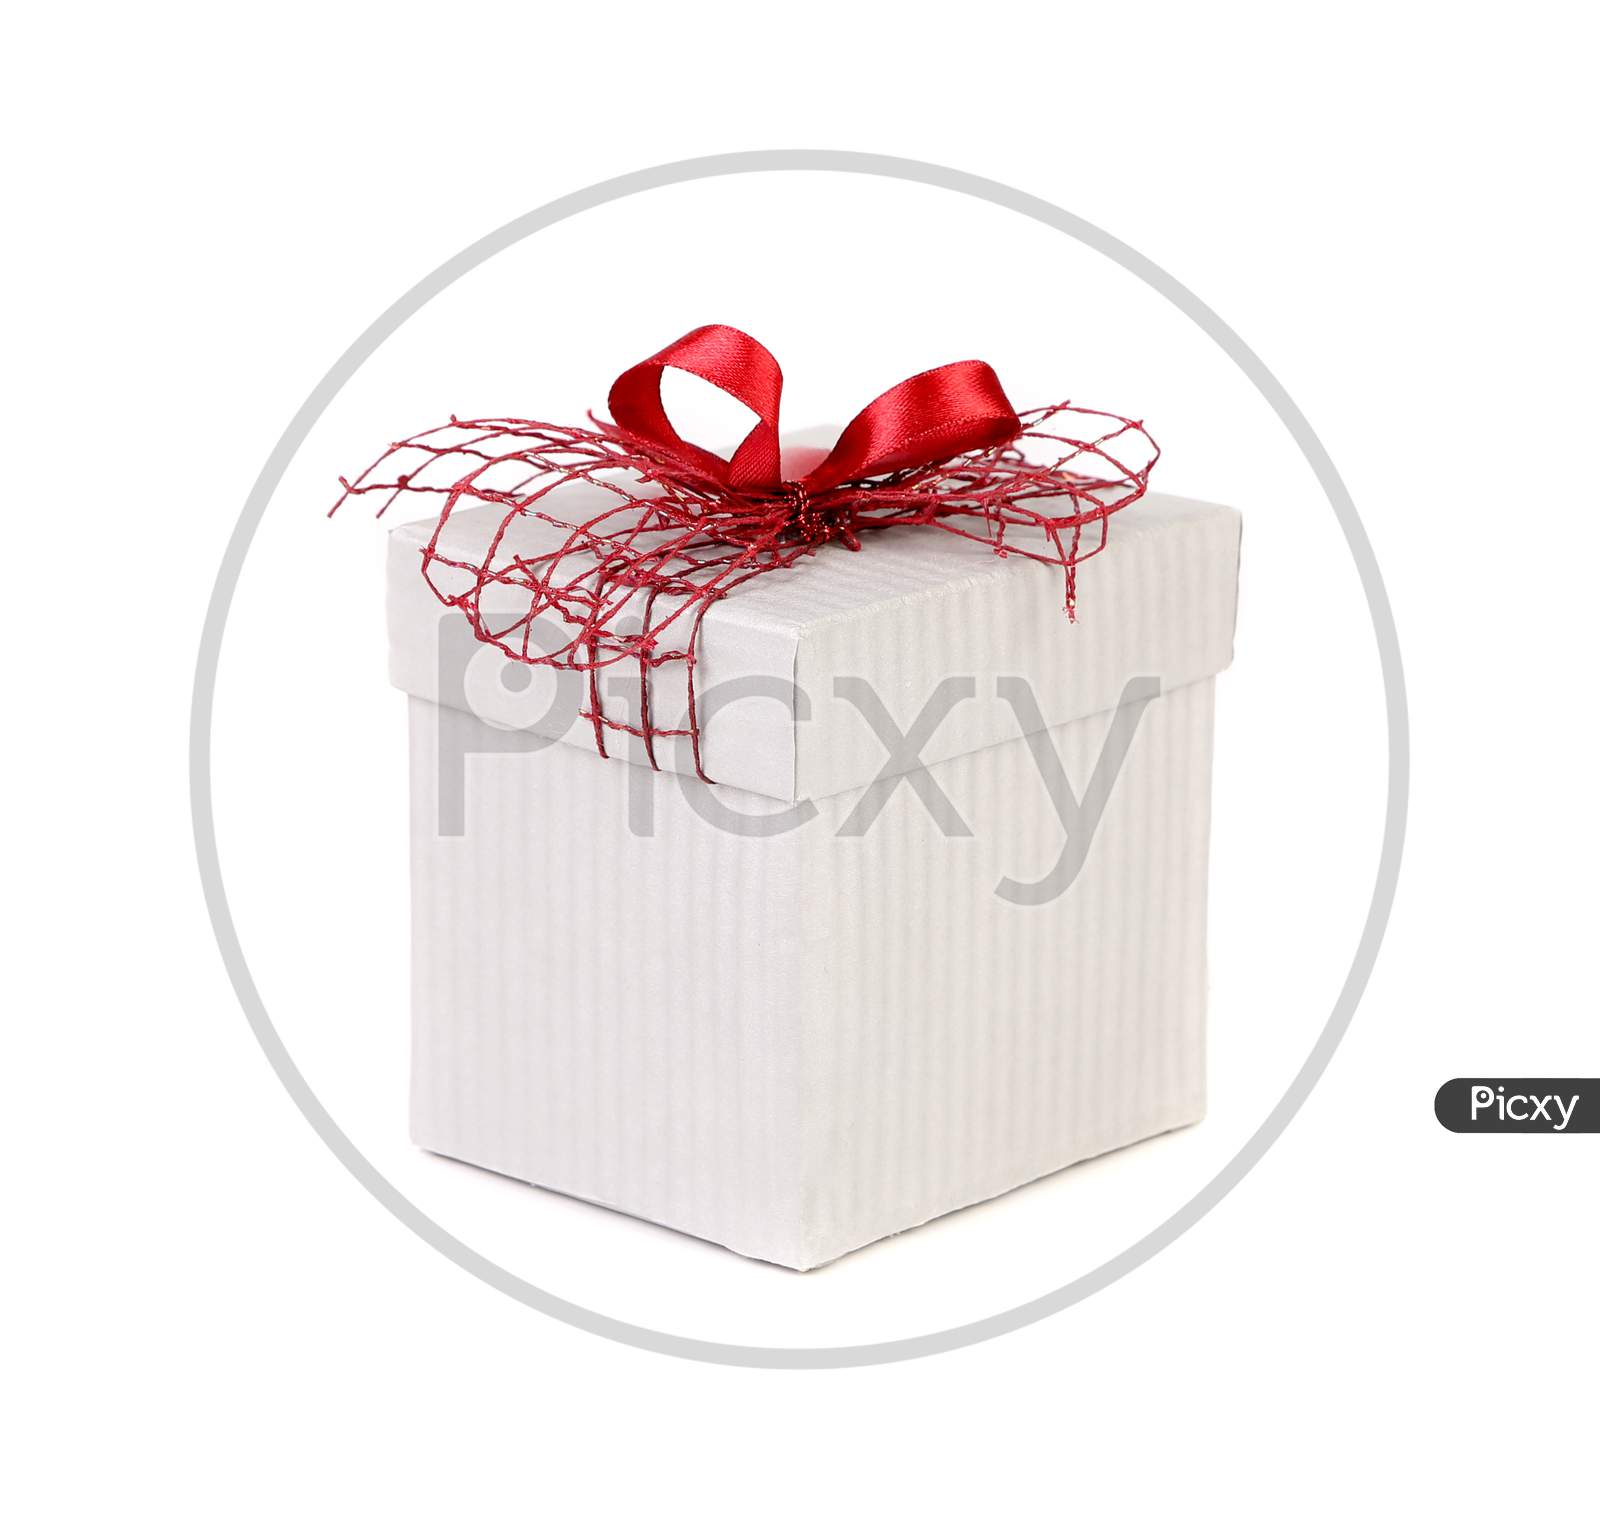 White Gift Box With Red Ribbon Bow. Isolated On A White Background.